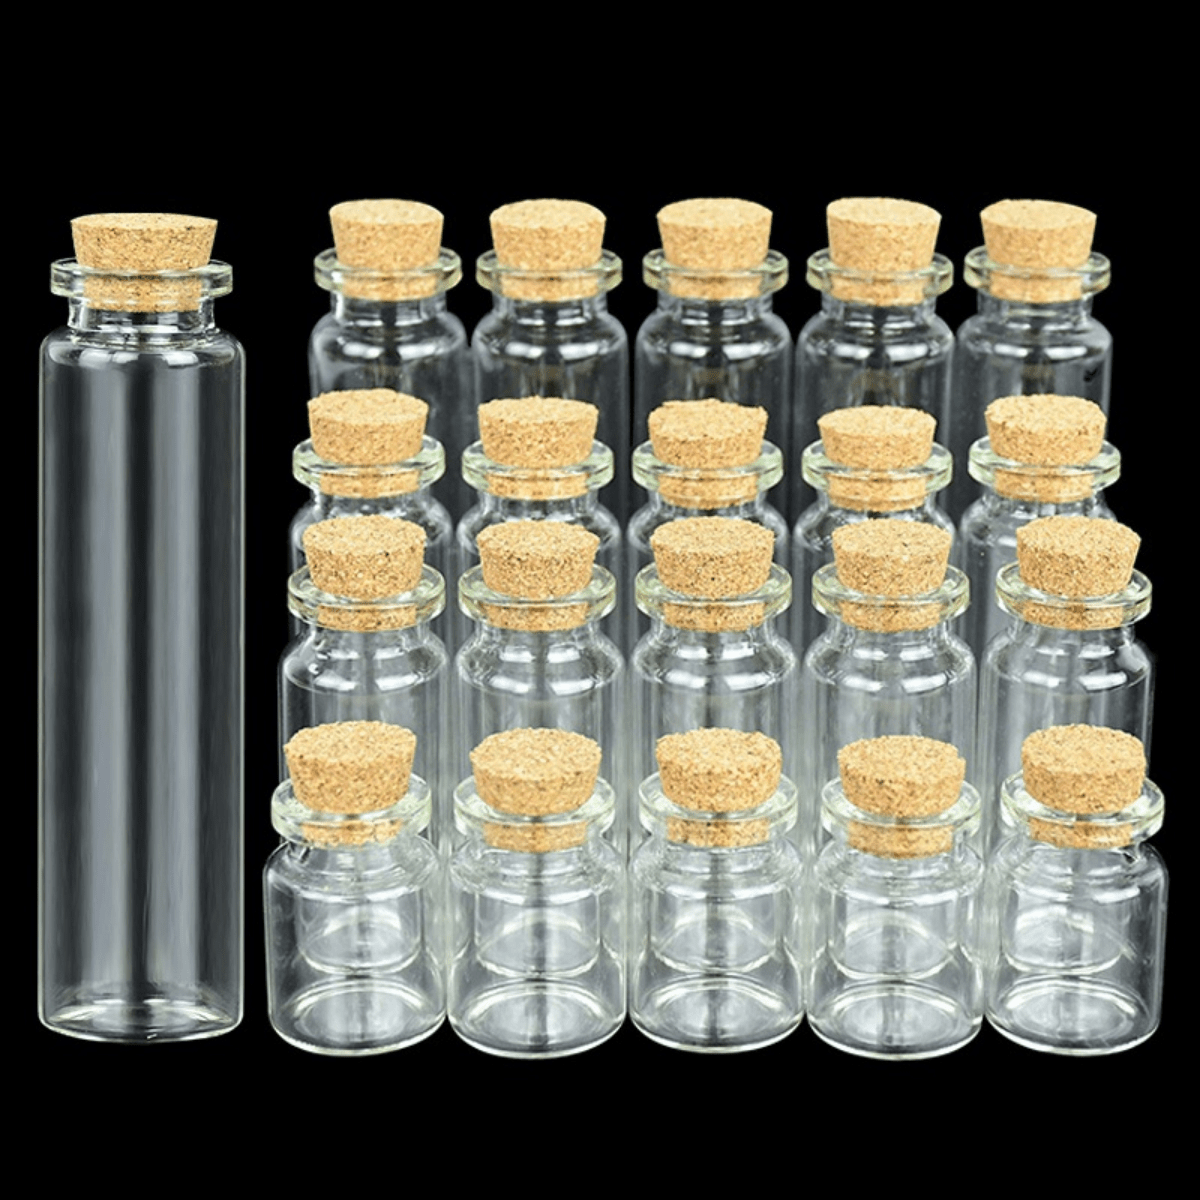 15 Pack Small Glass Bottles with Cork Stoppers - 1.7 oz (50ml